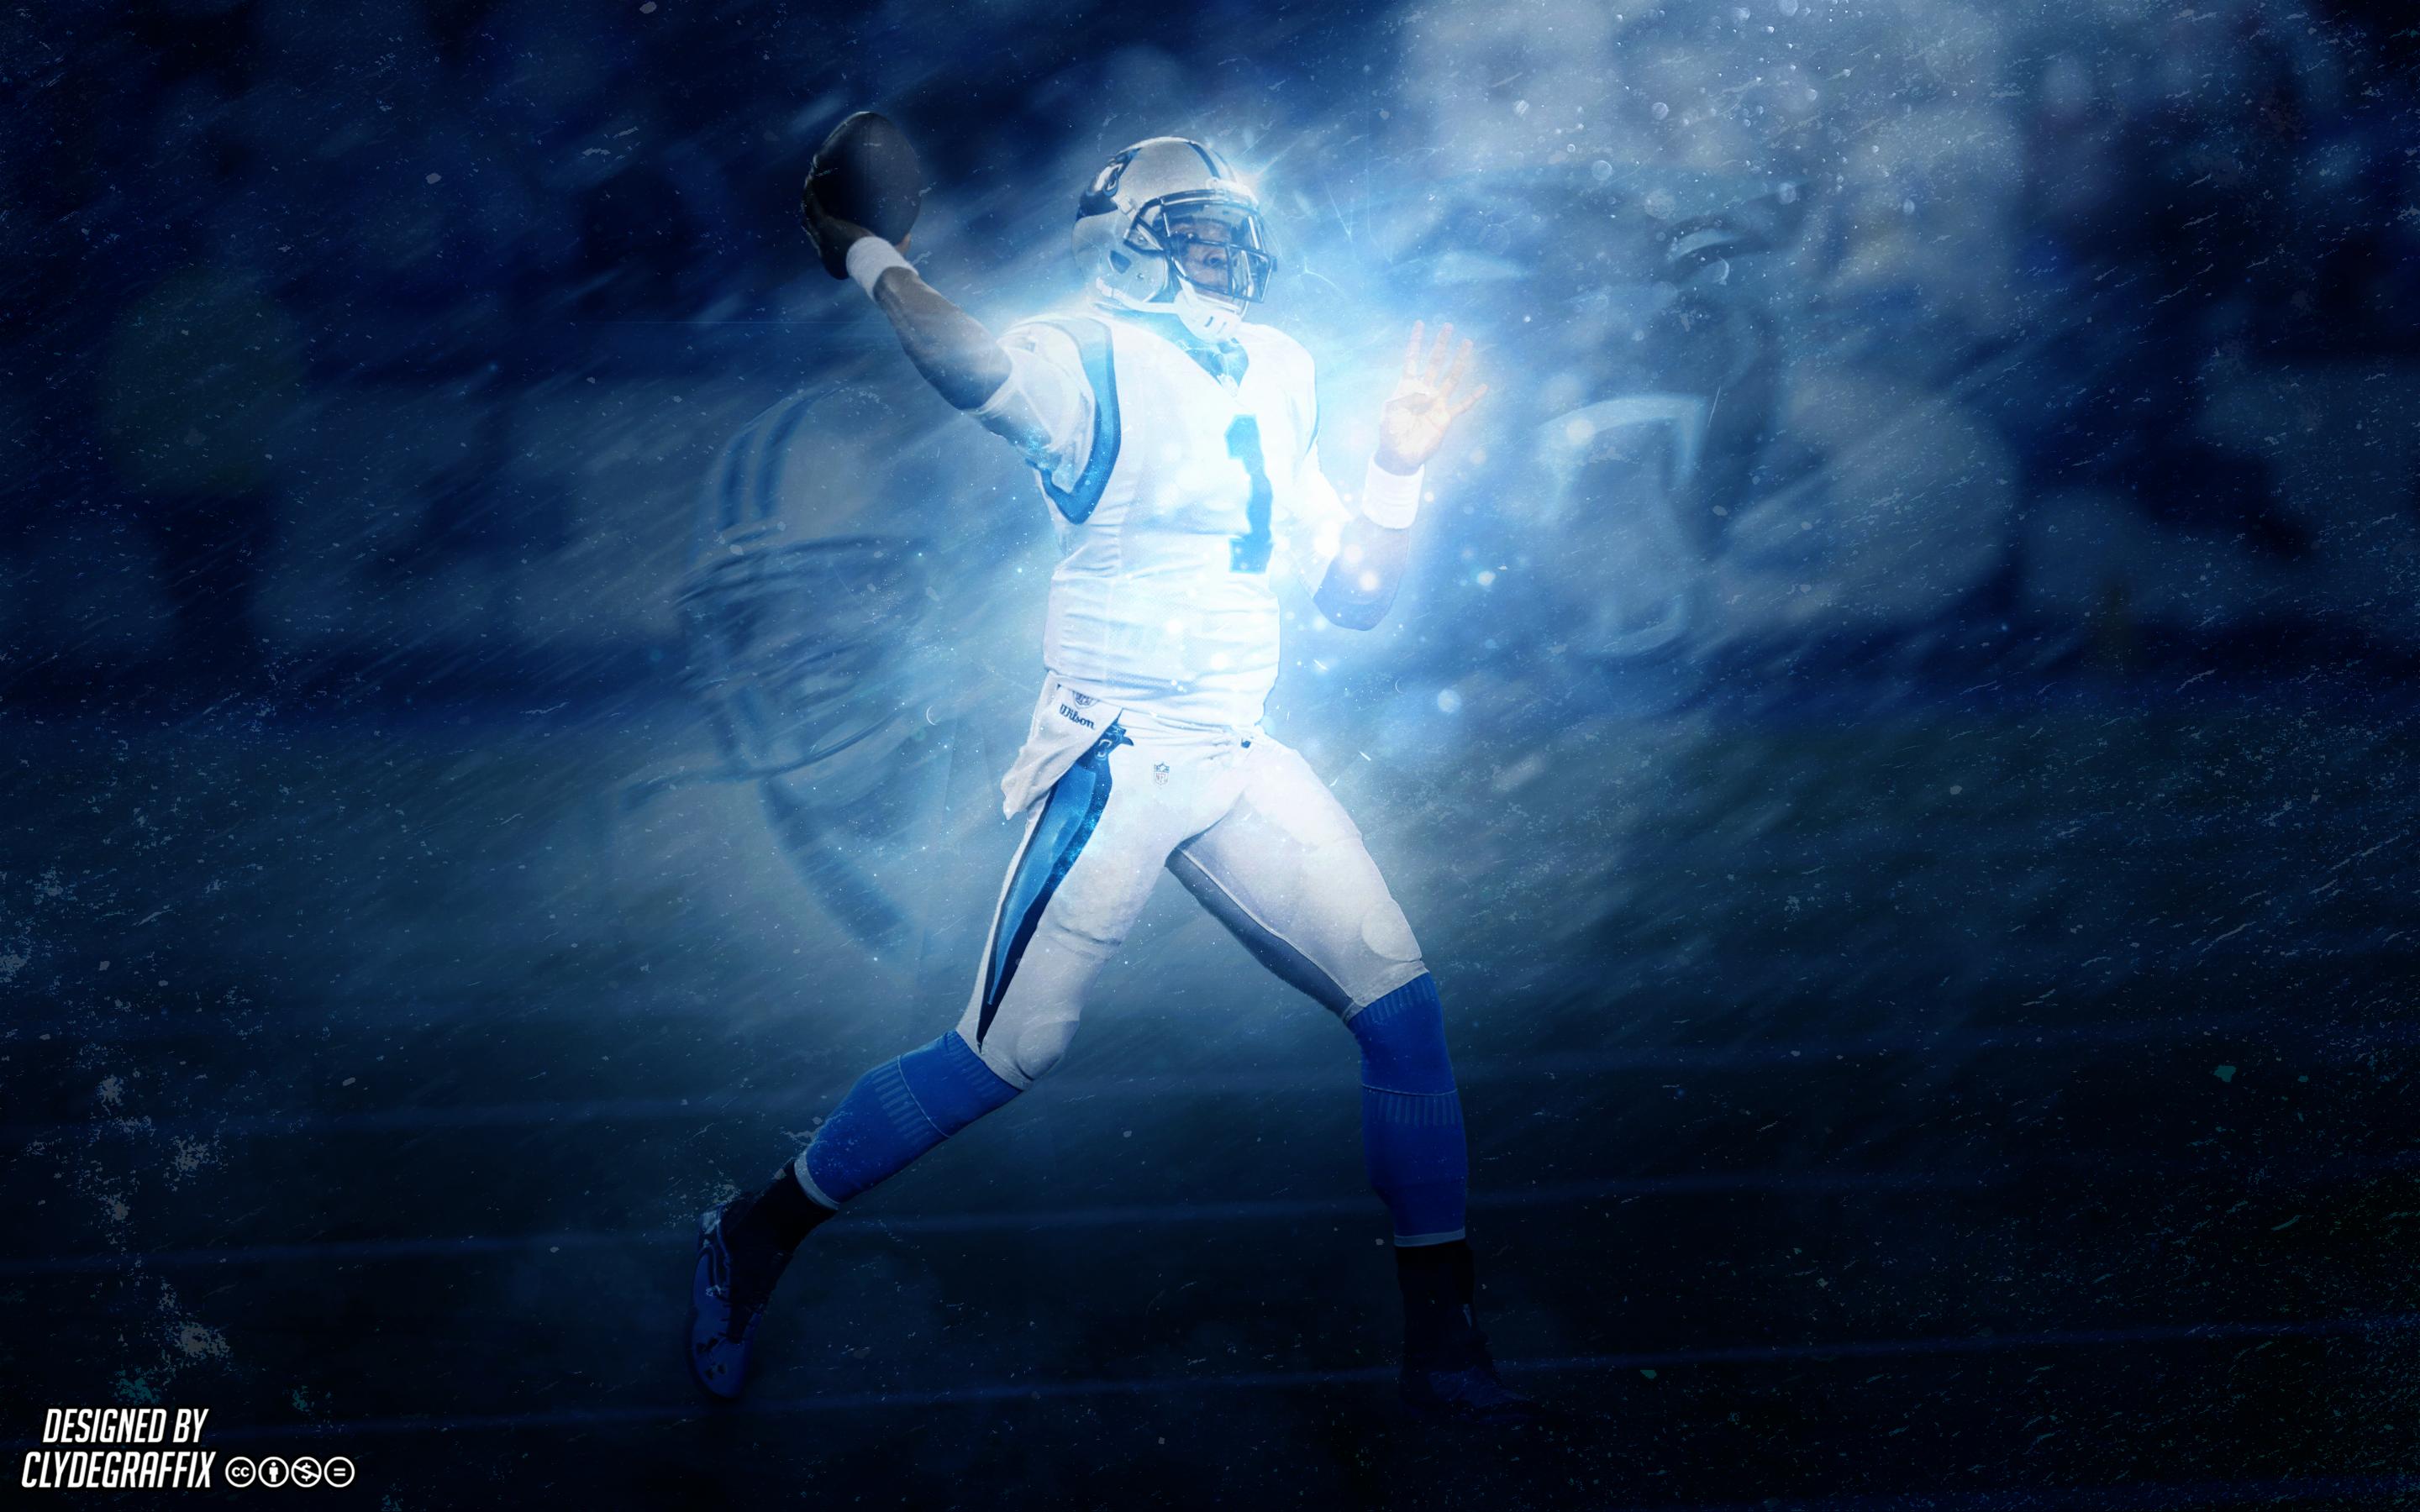 Made A Cam Newton Wallpaper That I Thout Some Of You Might Like